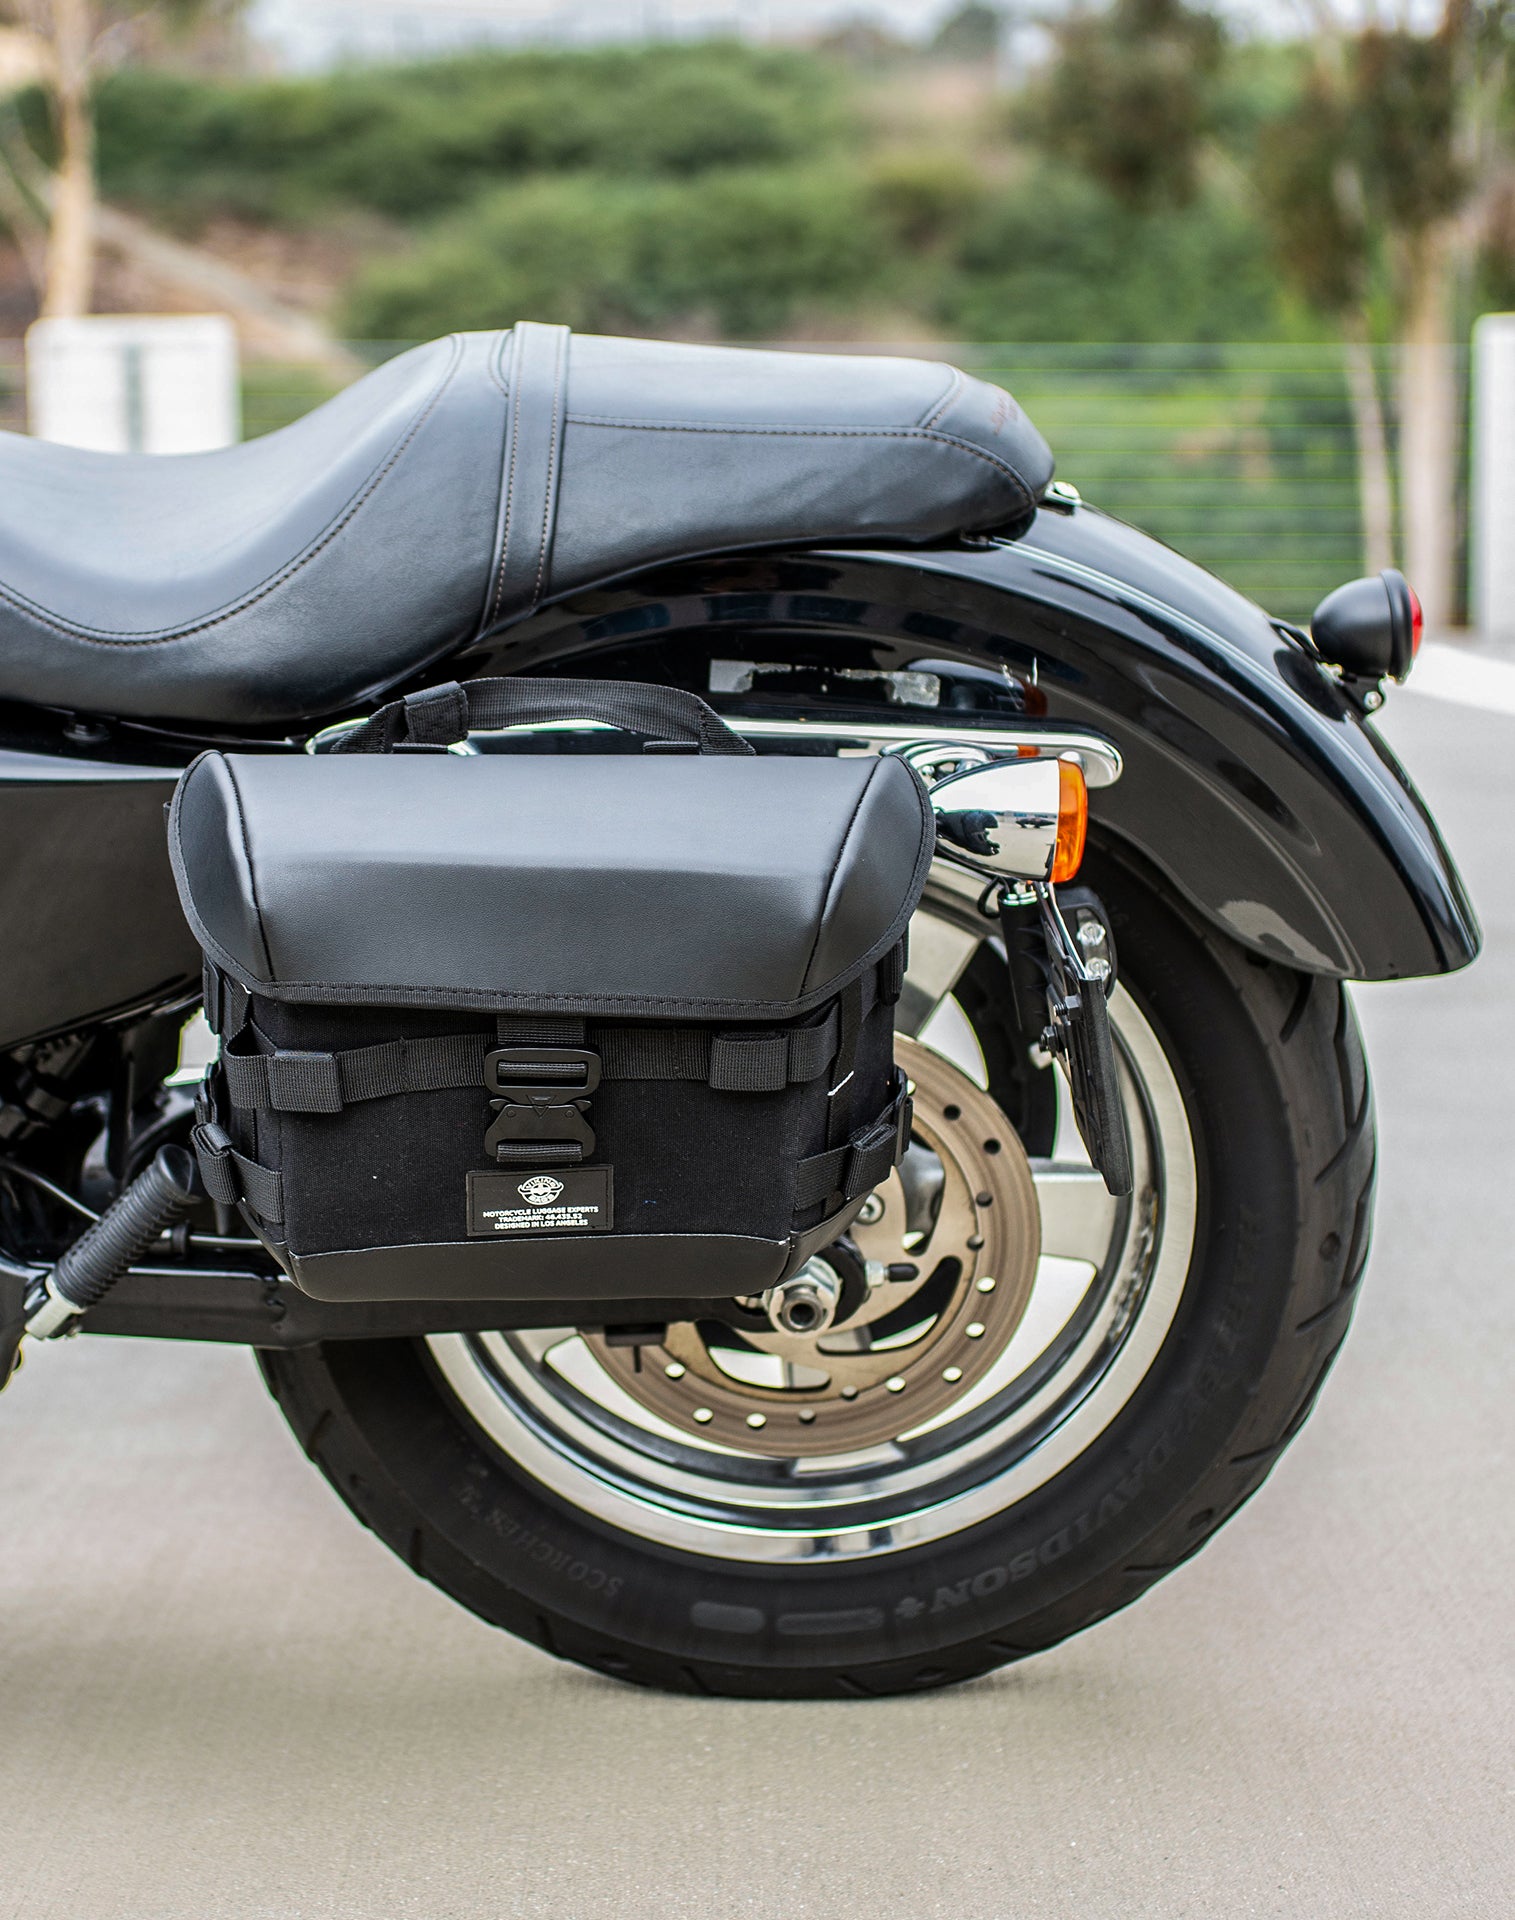 10L - Incognito Quick Mount Small Solo Motorcycle Saddlebag (Left Only) for Harley Sportster 1200 Custom XL1200C/XLH1200C/XL50